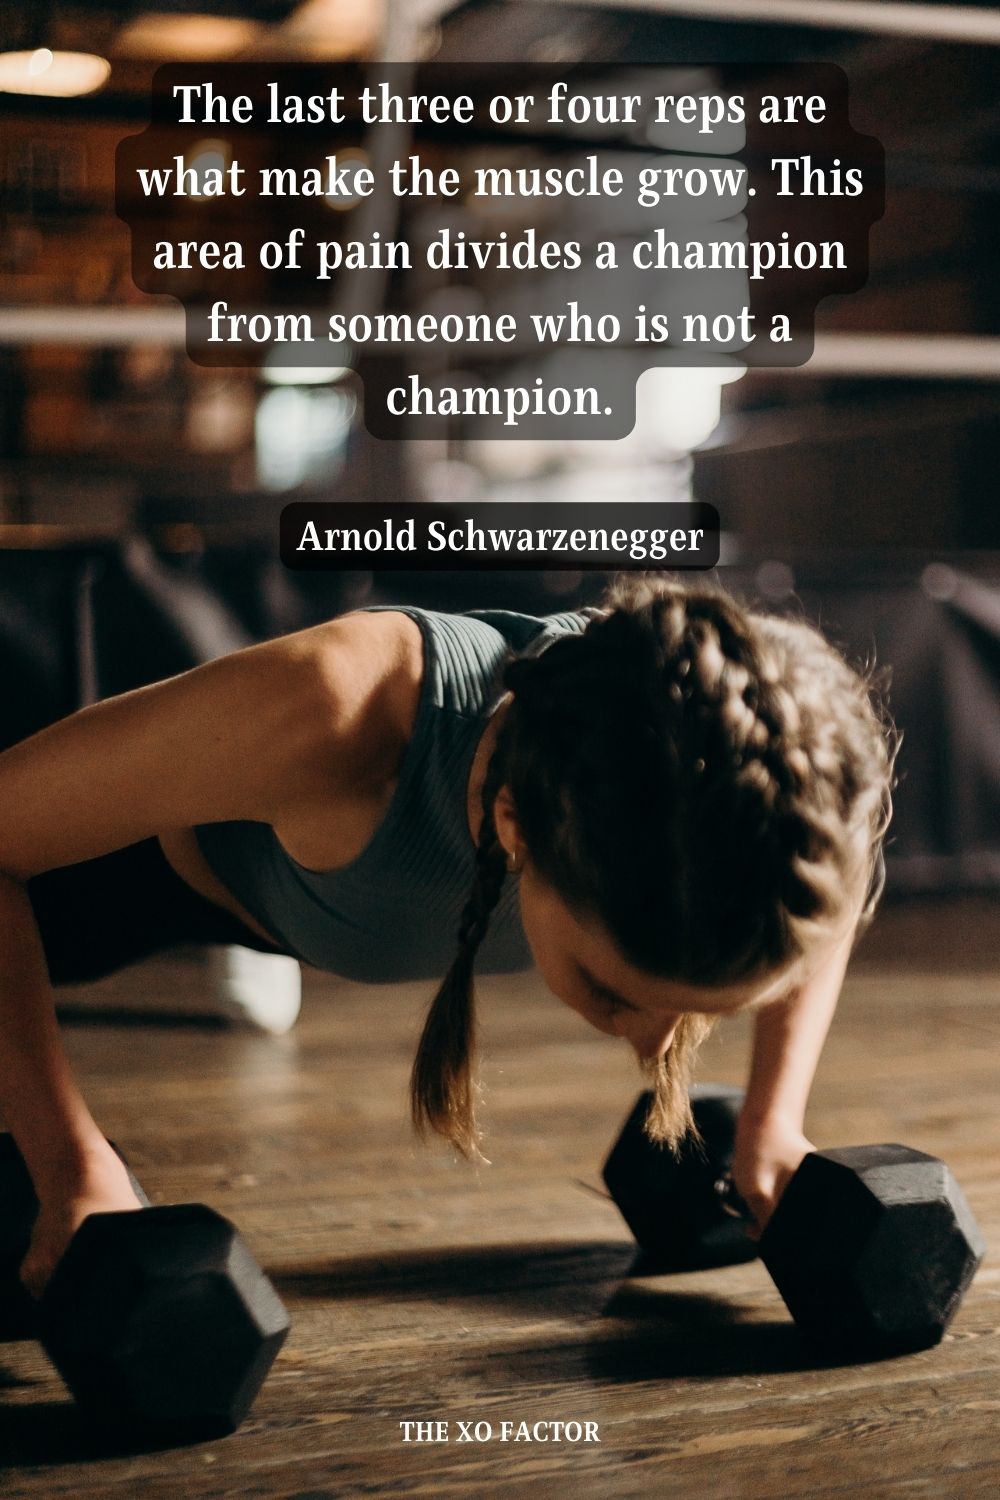 The last three or four reps are what make the muscle grow. This area of pain divides a champion from someone who is not a champion. Arnold Schwarzenegger